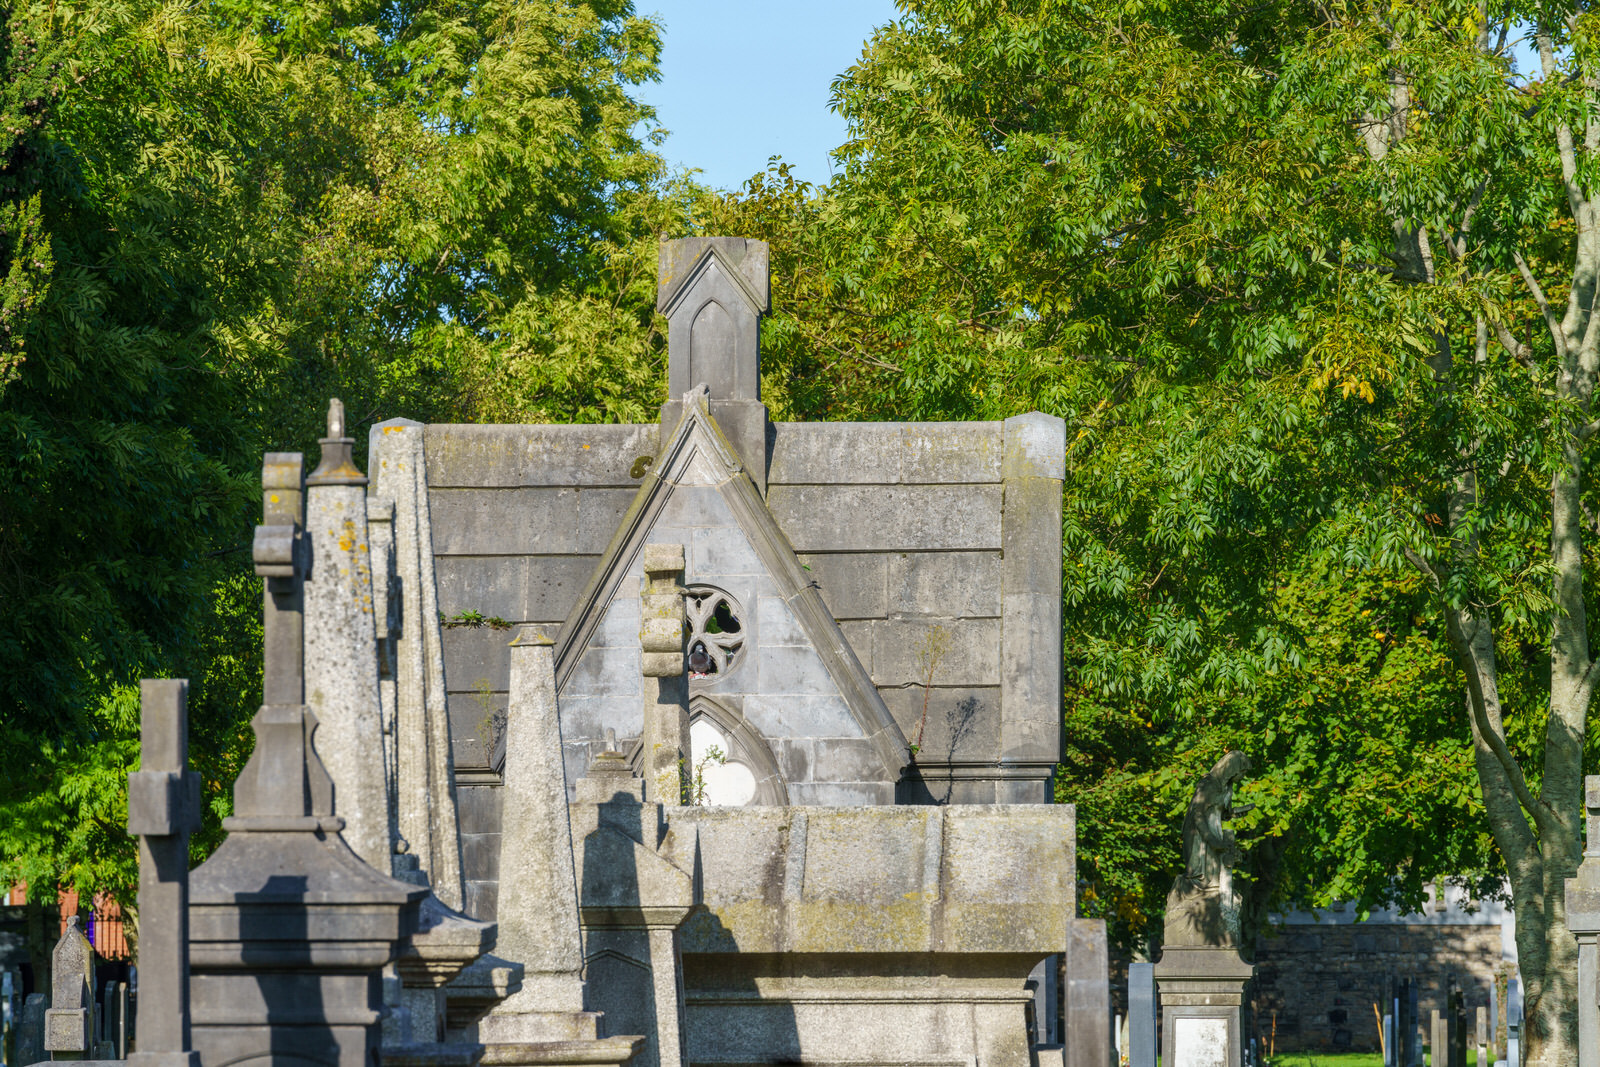 THE OLDER SECTION OF GLASNEVIN CEMETERY [I USED A SONY 70-200MM GM LENS] 013